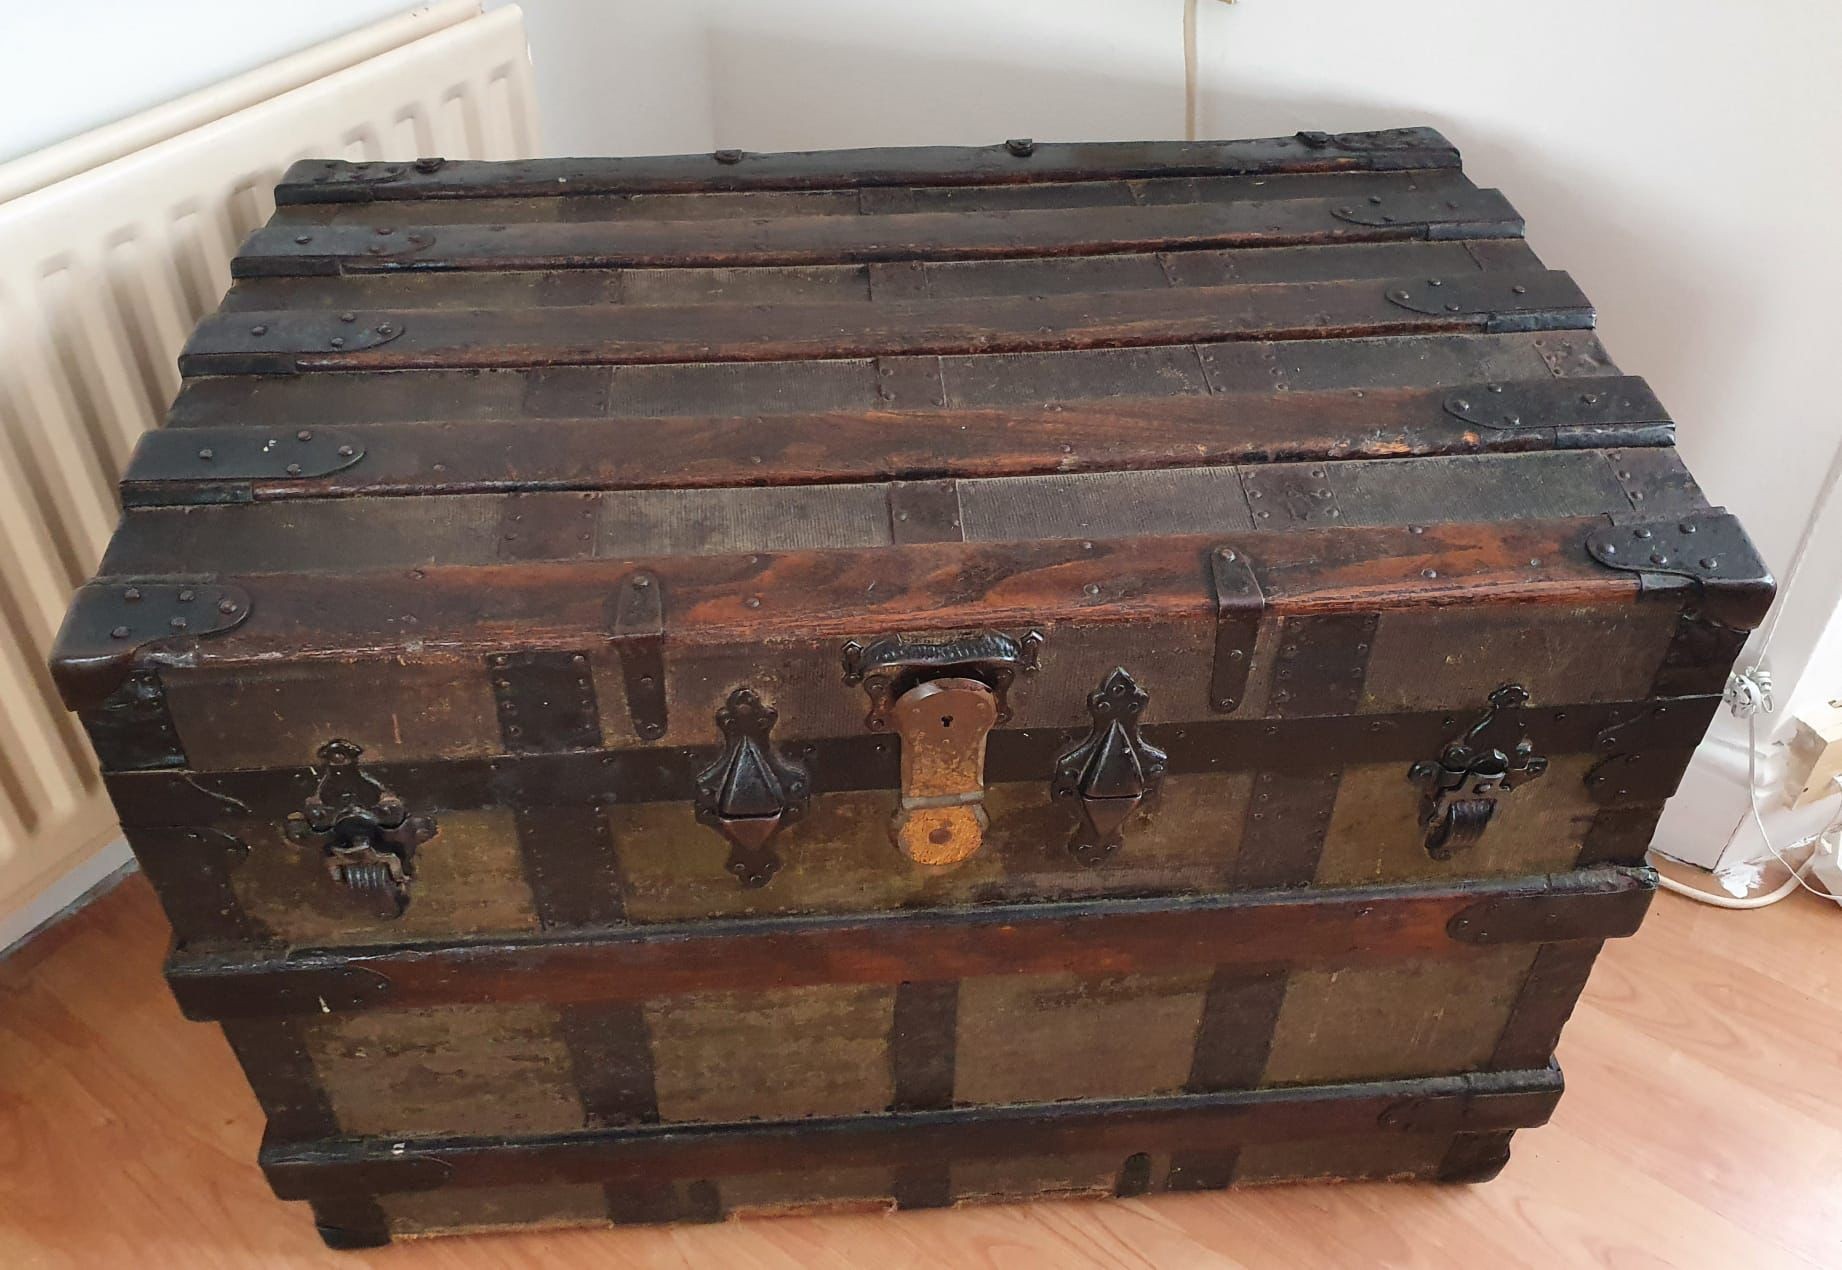 Large Vintage Wood and Metal Trunk, comes with two new leather straps. Good condition for age.